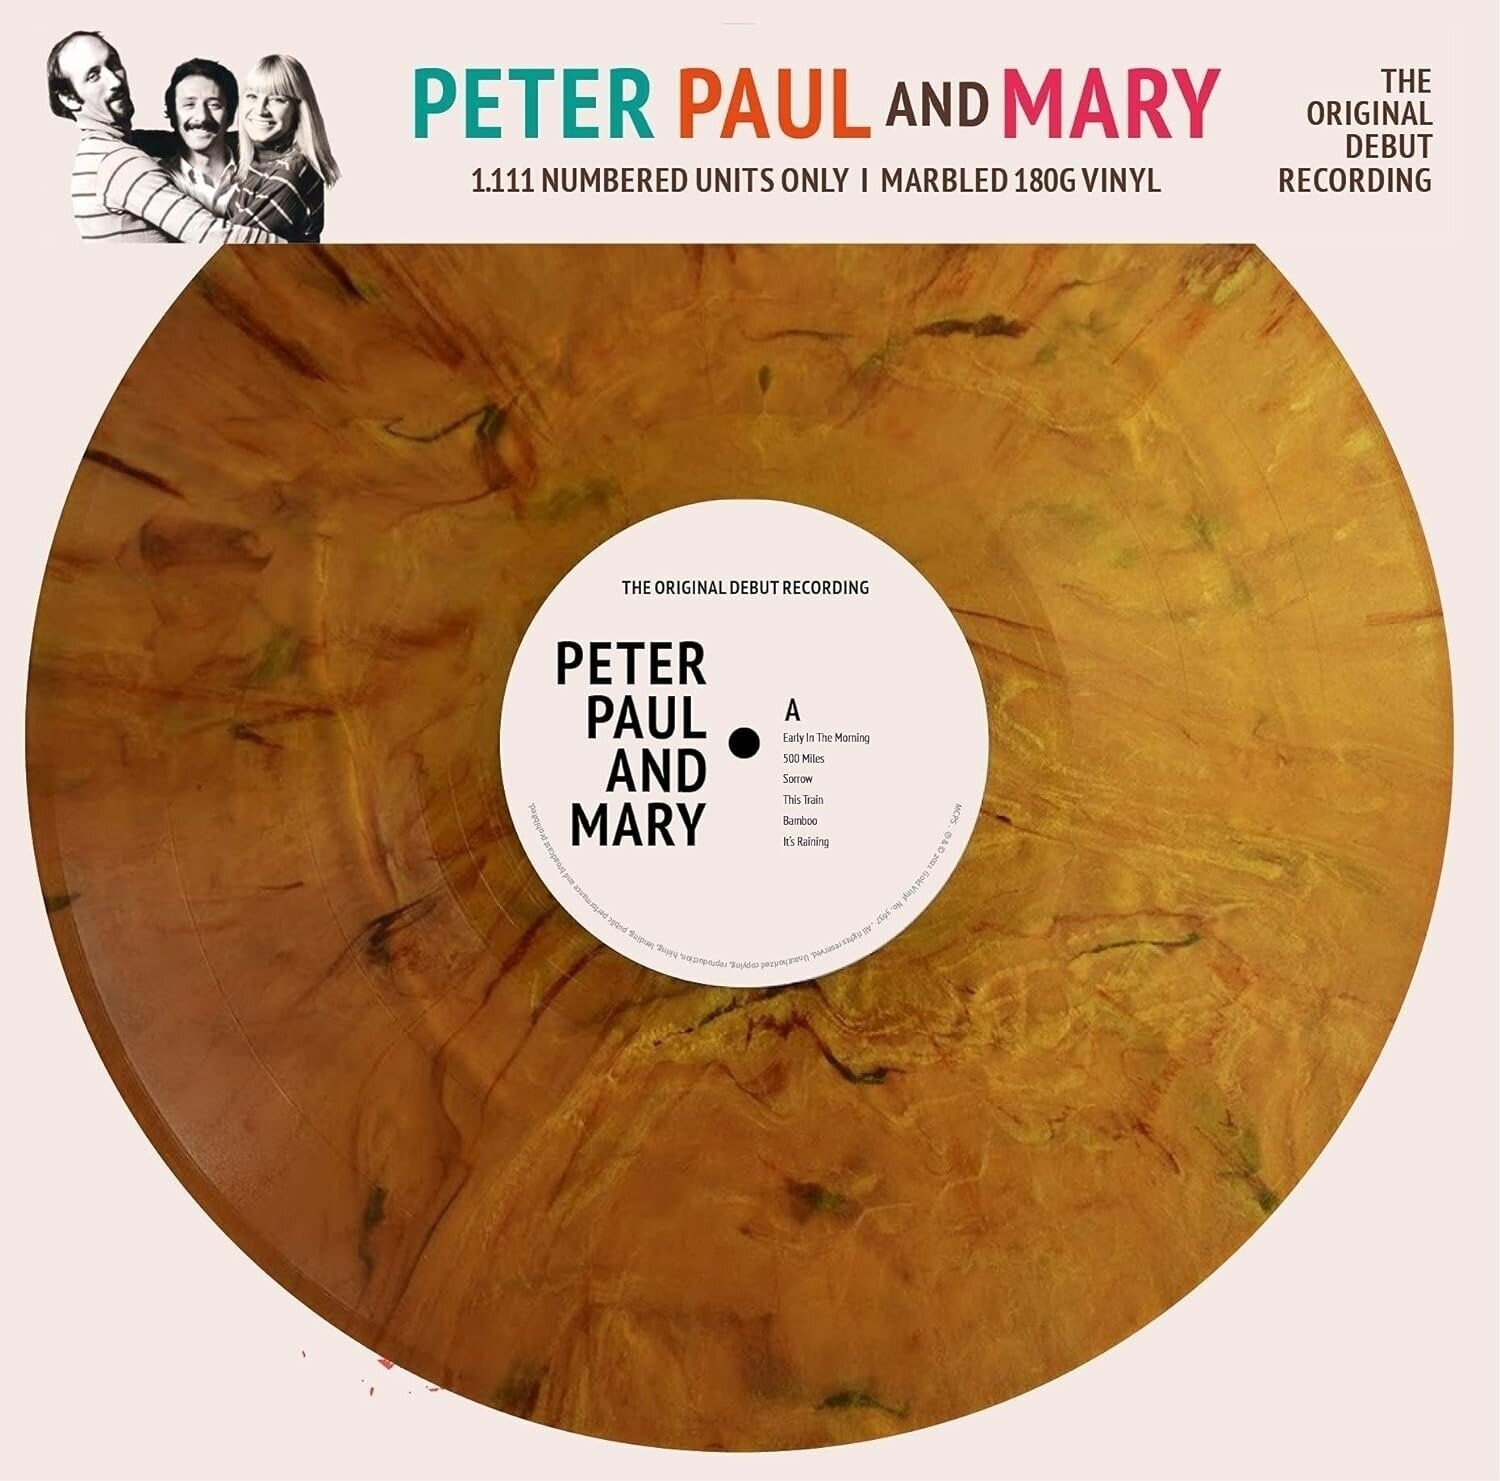 Vinylplade Peter, Paul and Mary - The Original Debut Recording (Limited Edition) (Numbered) (Gold Marbled Coloured) (LP)